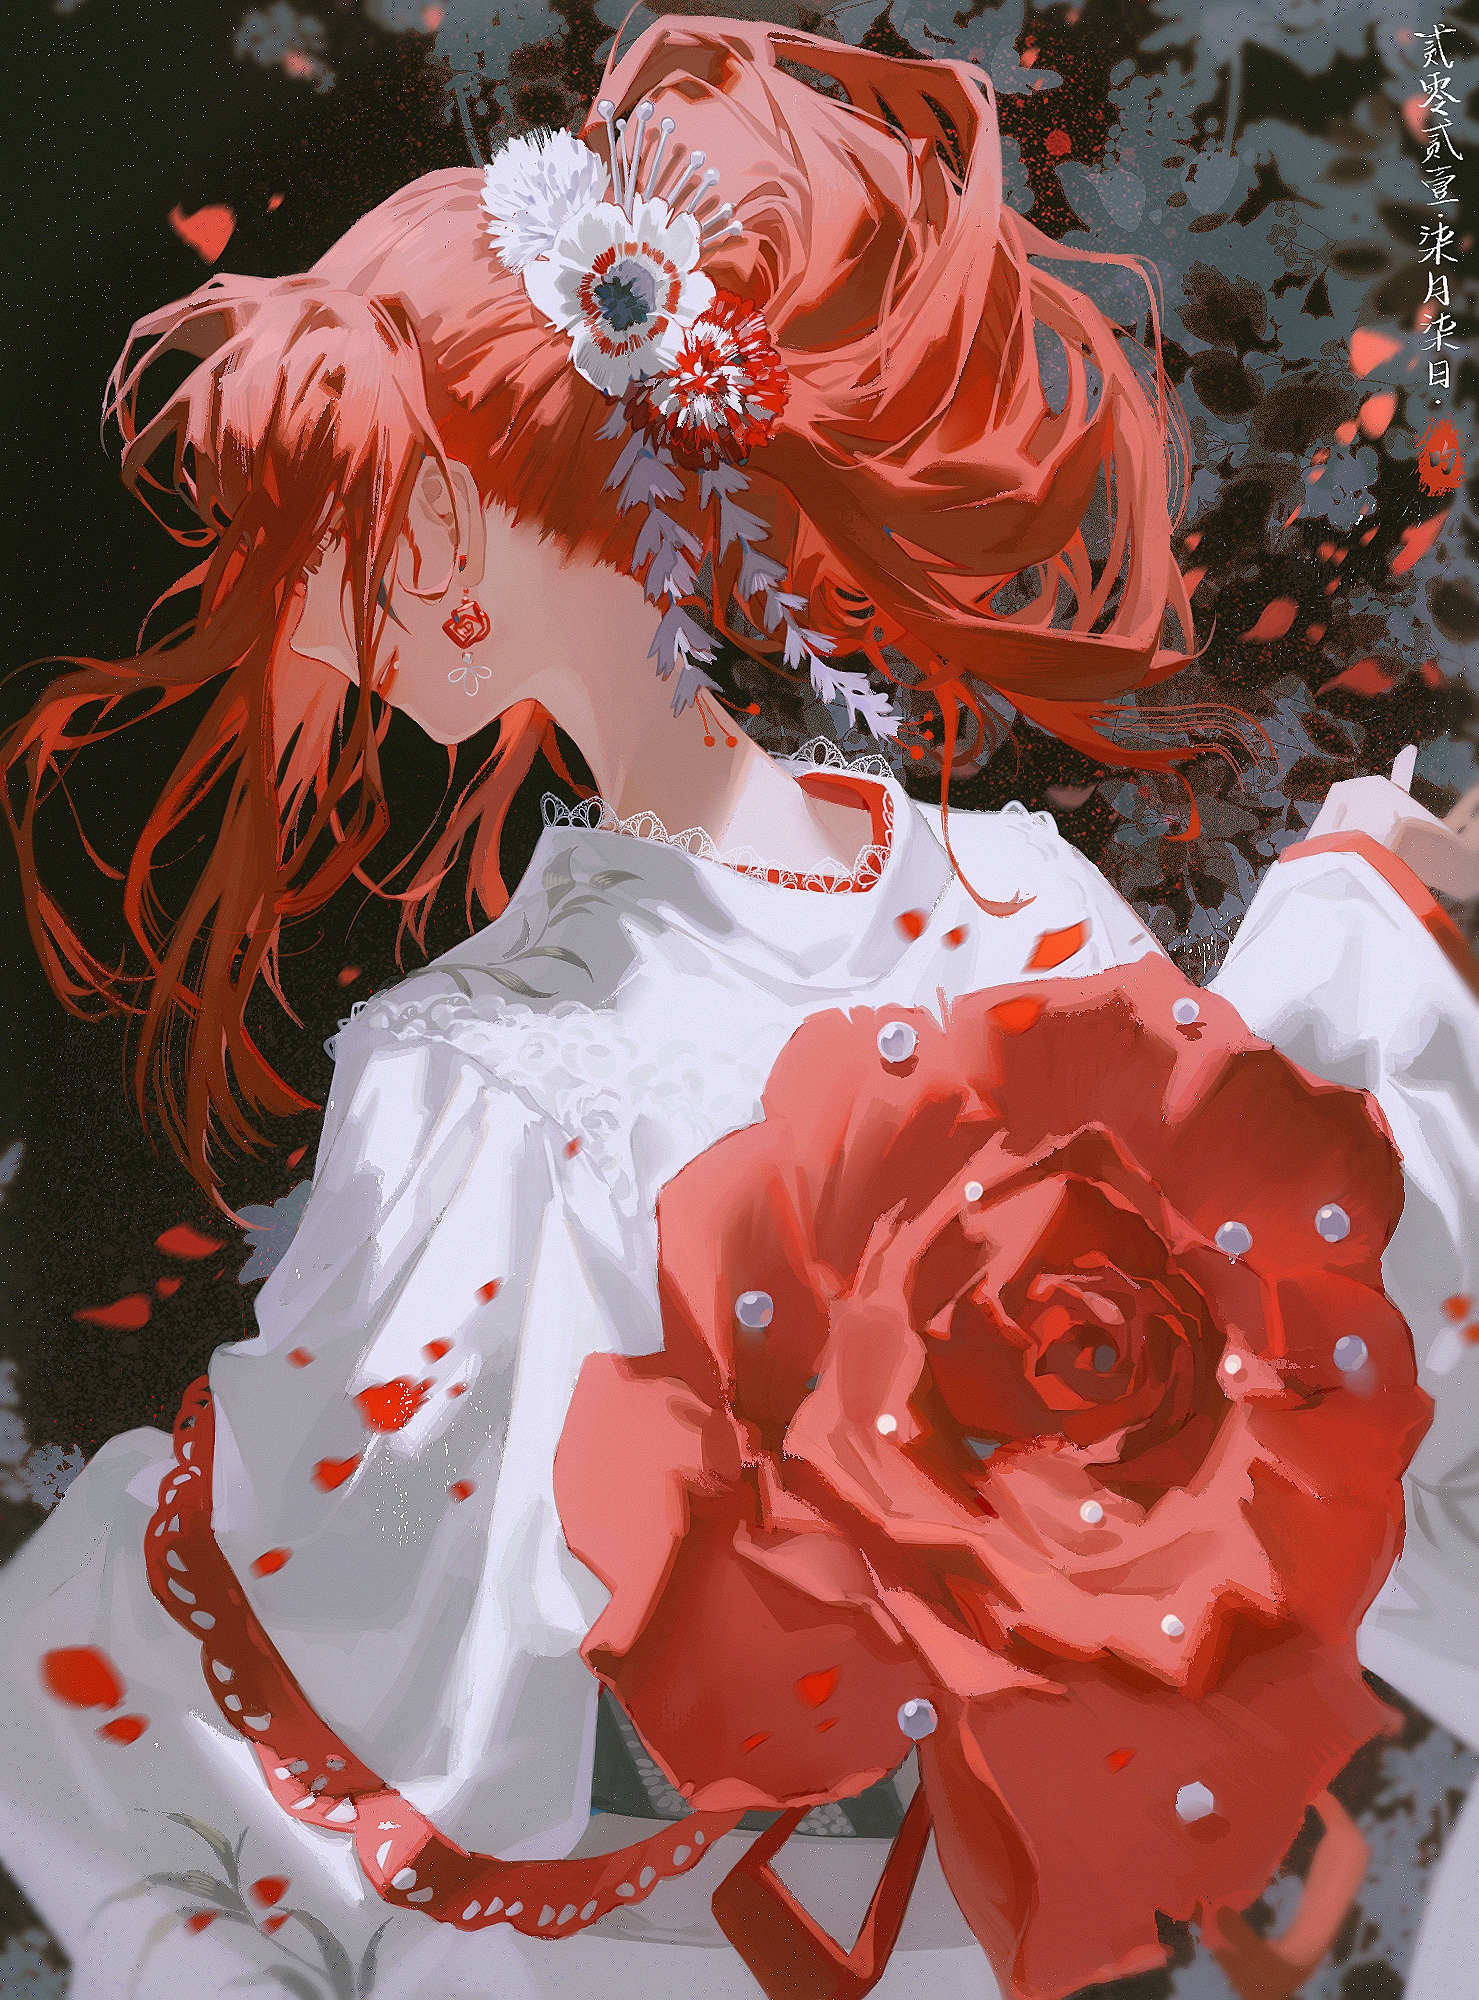 Anime 1479x2000 anime anime girls Pixiv Forever 7th Capital portrait display redhead long hair parted lips Japanese petals dress earring rose looking away